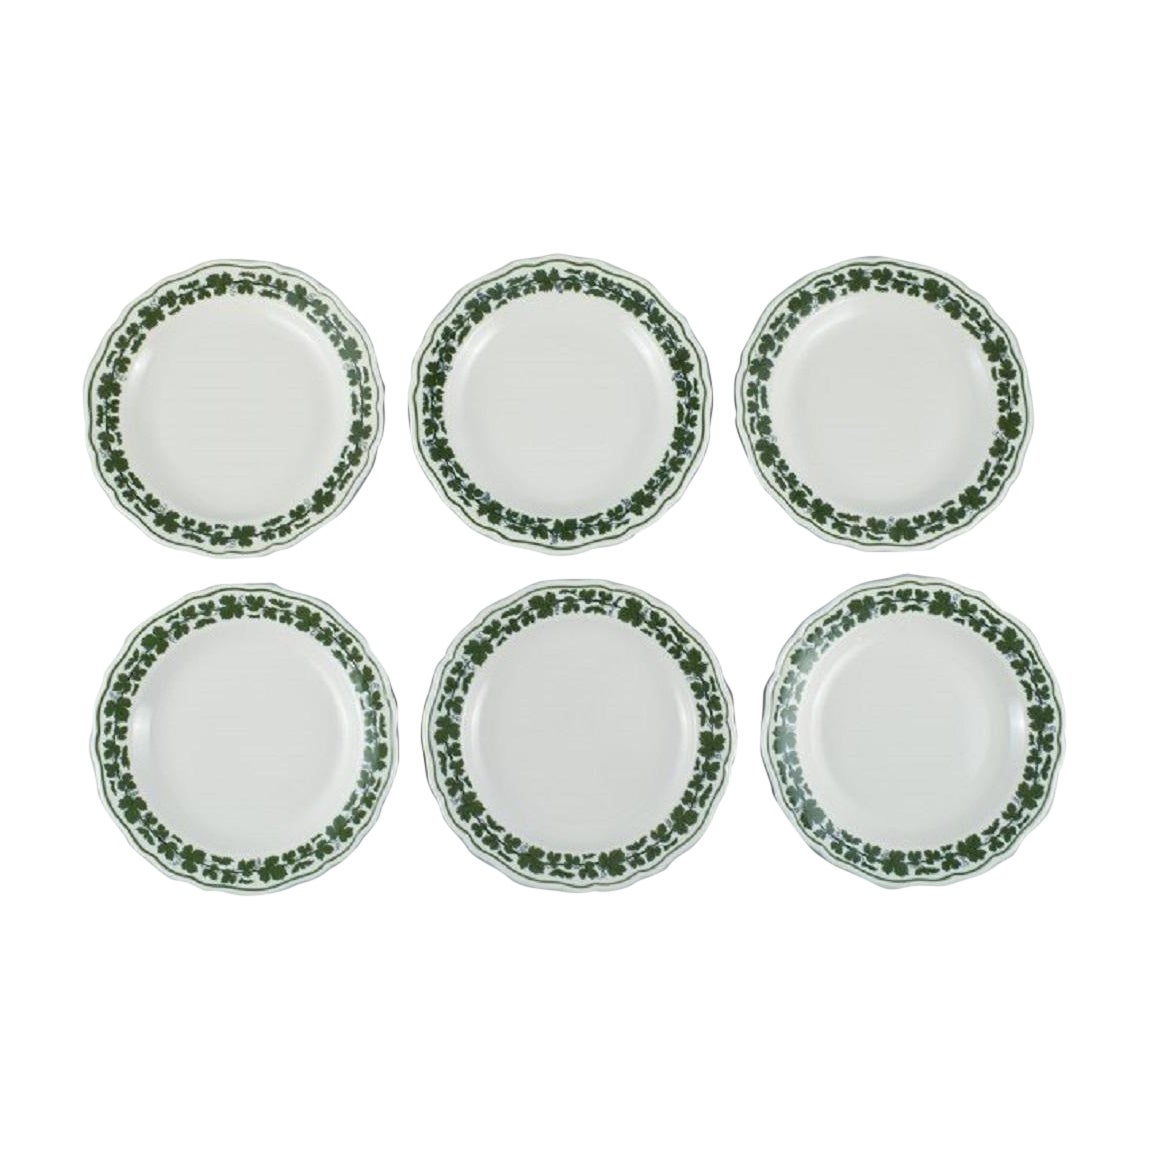 Six Meissen Green Ivy Vine plates in hand-painted porcelain, 1940s